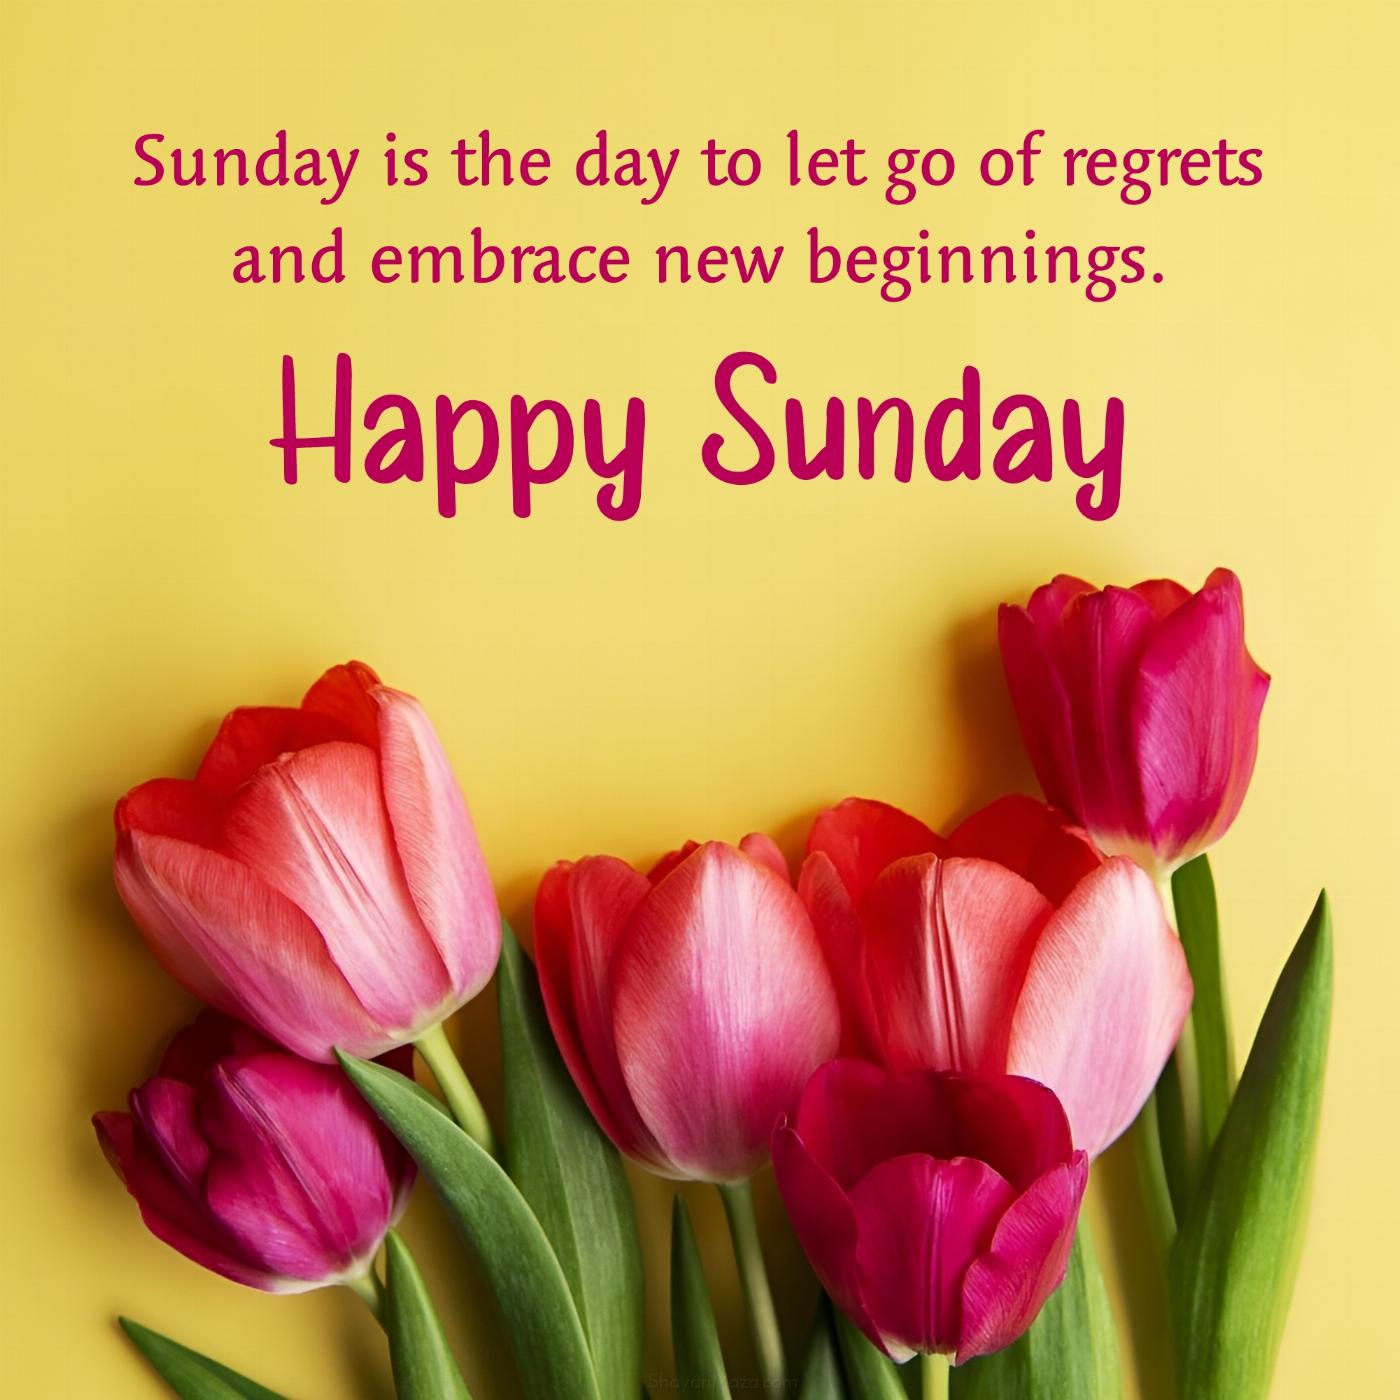 Sunday is the day to let go of regrets and embrace new beginnings